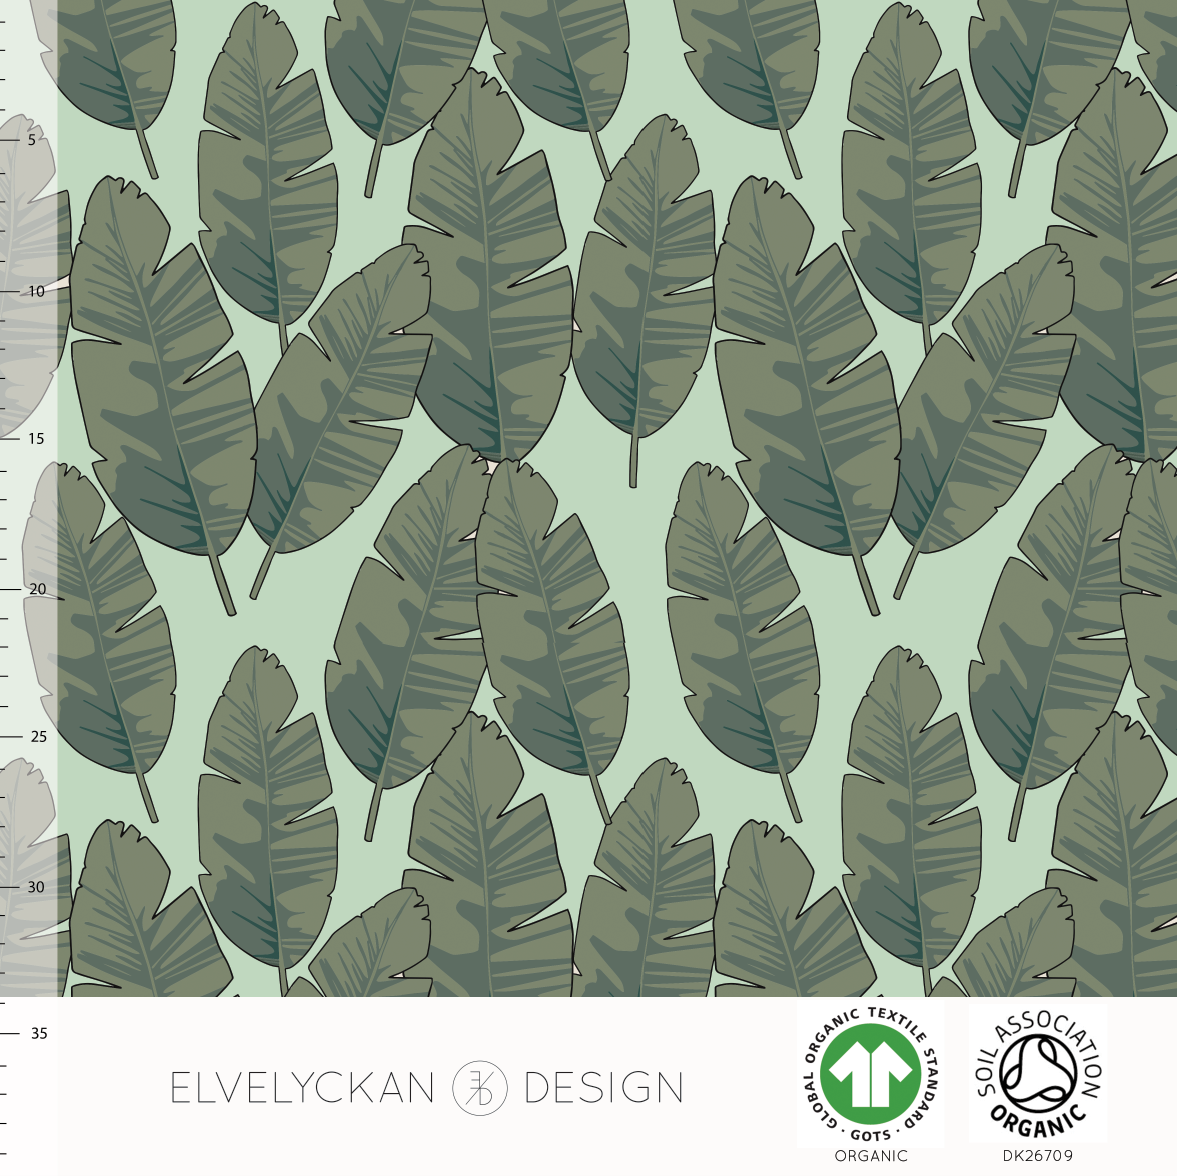 Elvelyckan banana leaf Neo Mint organic jersey cotton knit fabric.  With green banana leaves on a light green background